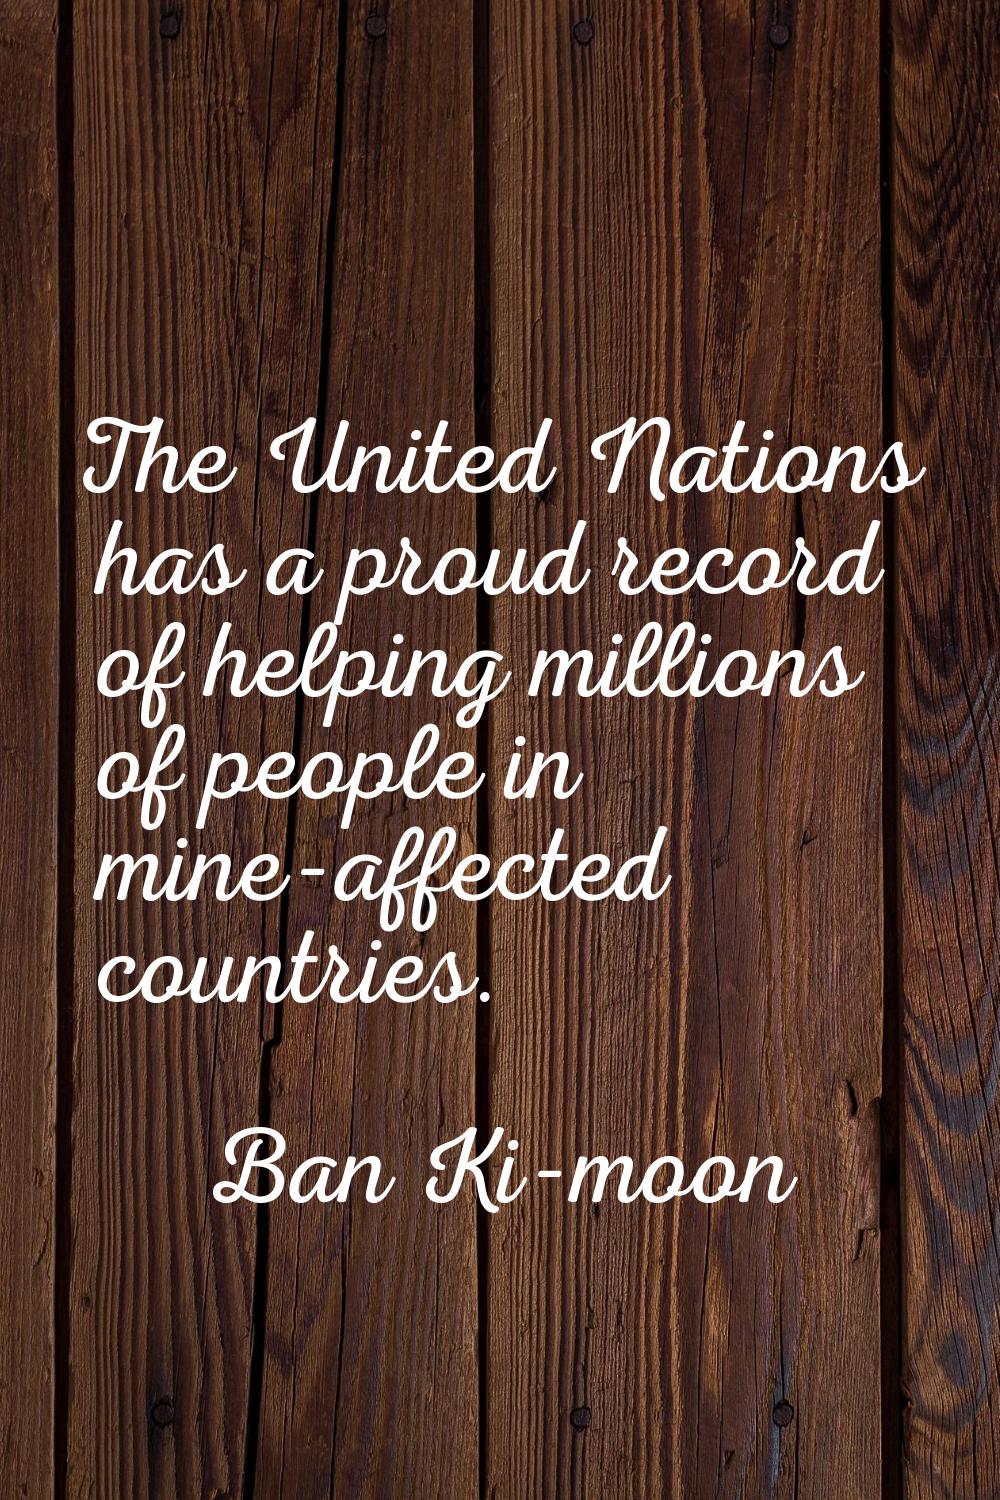 The United Nations has a proud record of helping millions of people in mine-affected countries.